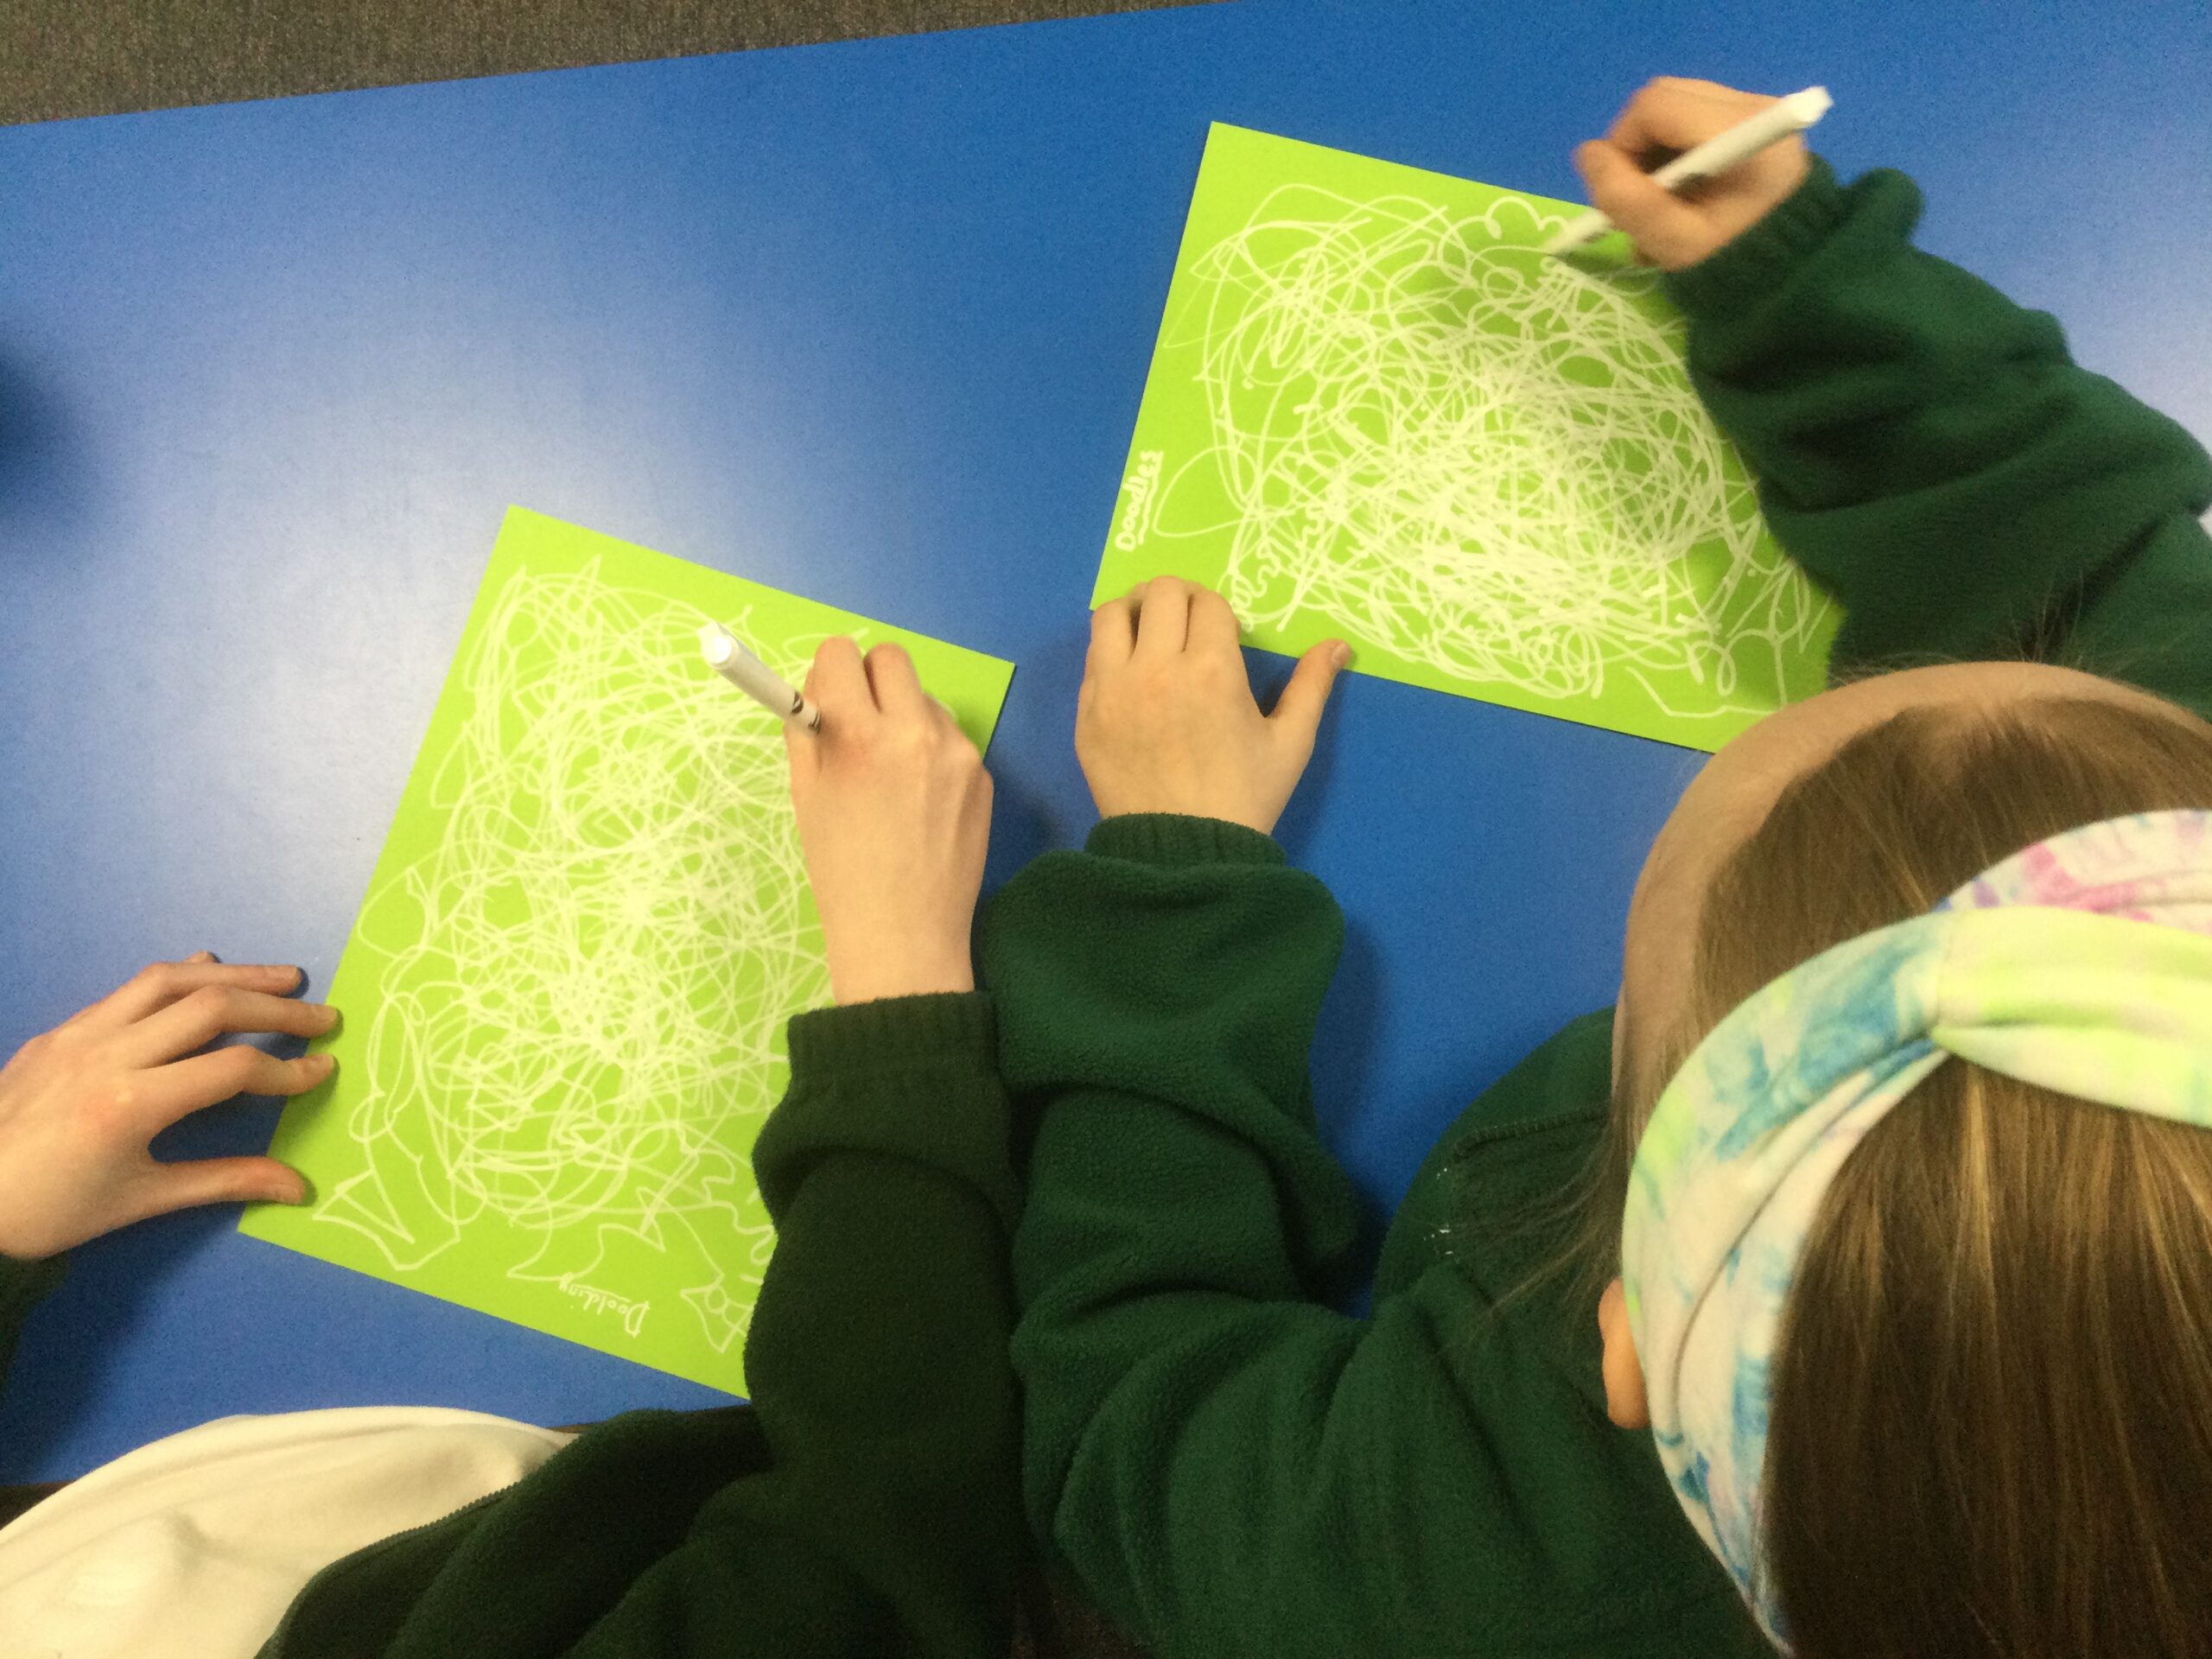 Overhead view of children drawing in white pen on a green background